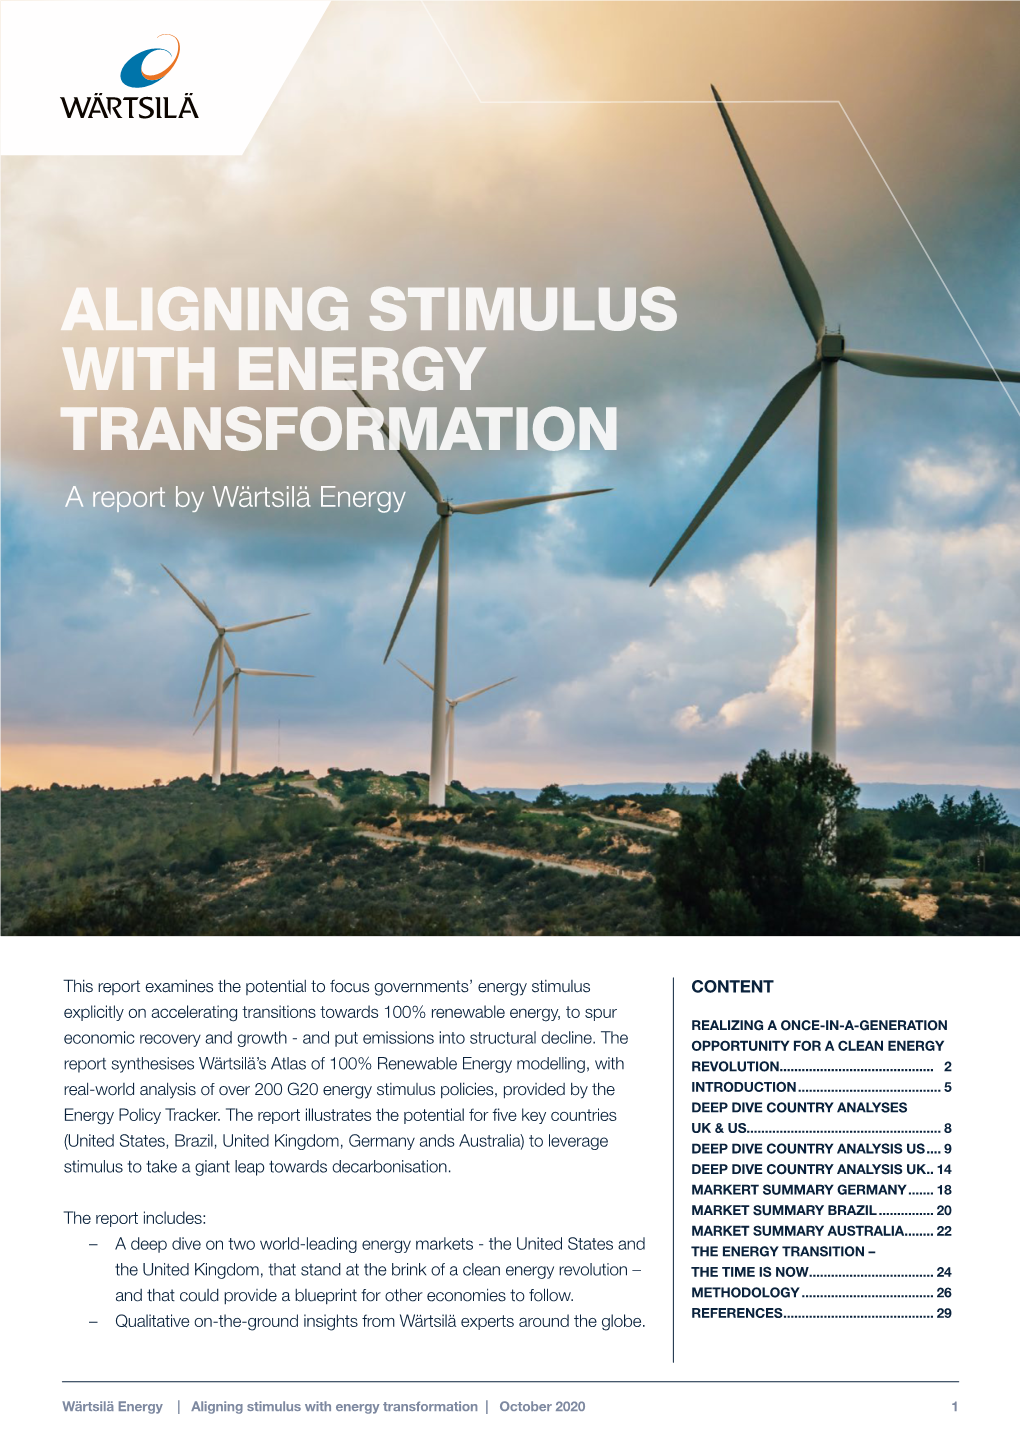 ALIGNING STIMULUS with ENERGY TRANSFORMATION a Report by Wärtsilä Energy